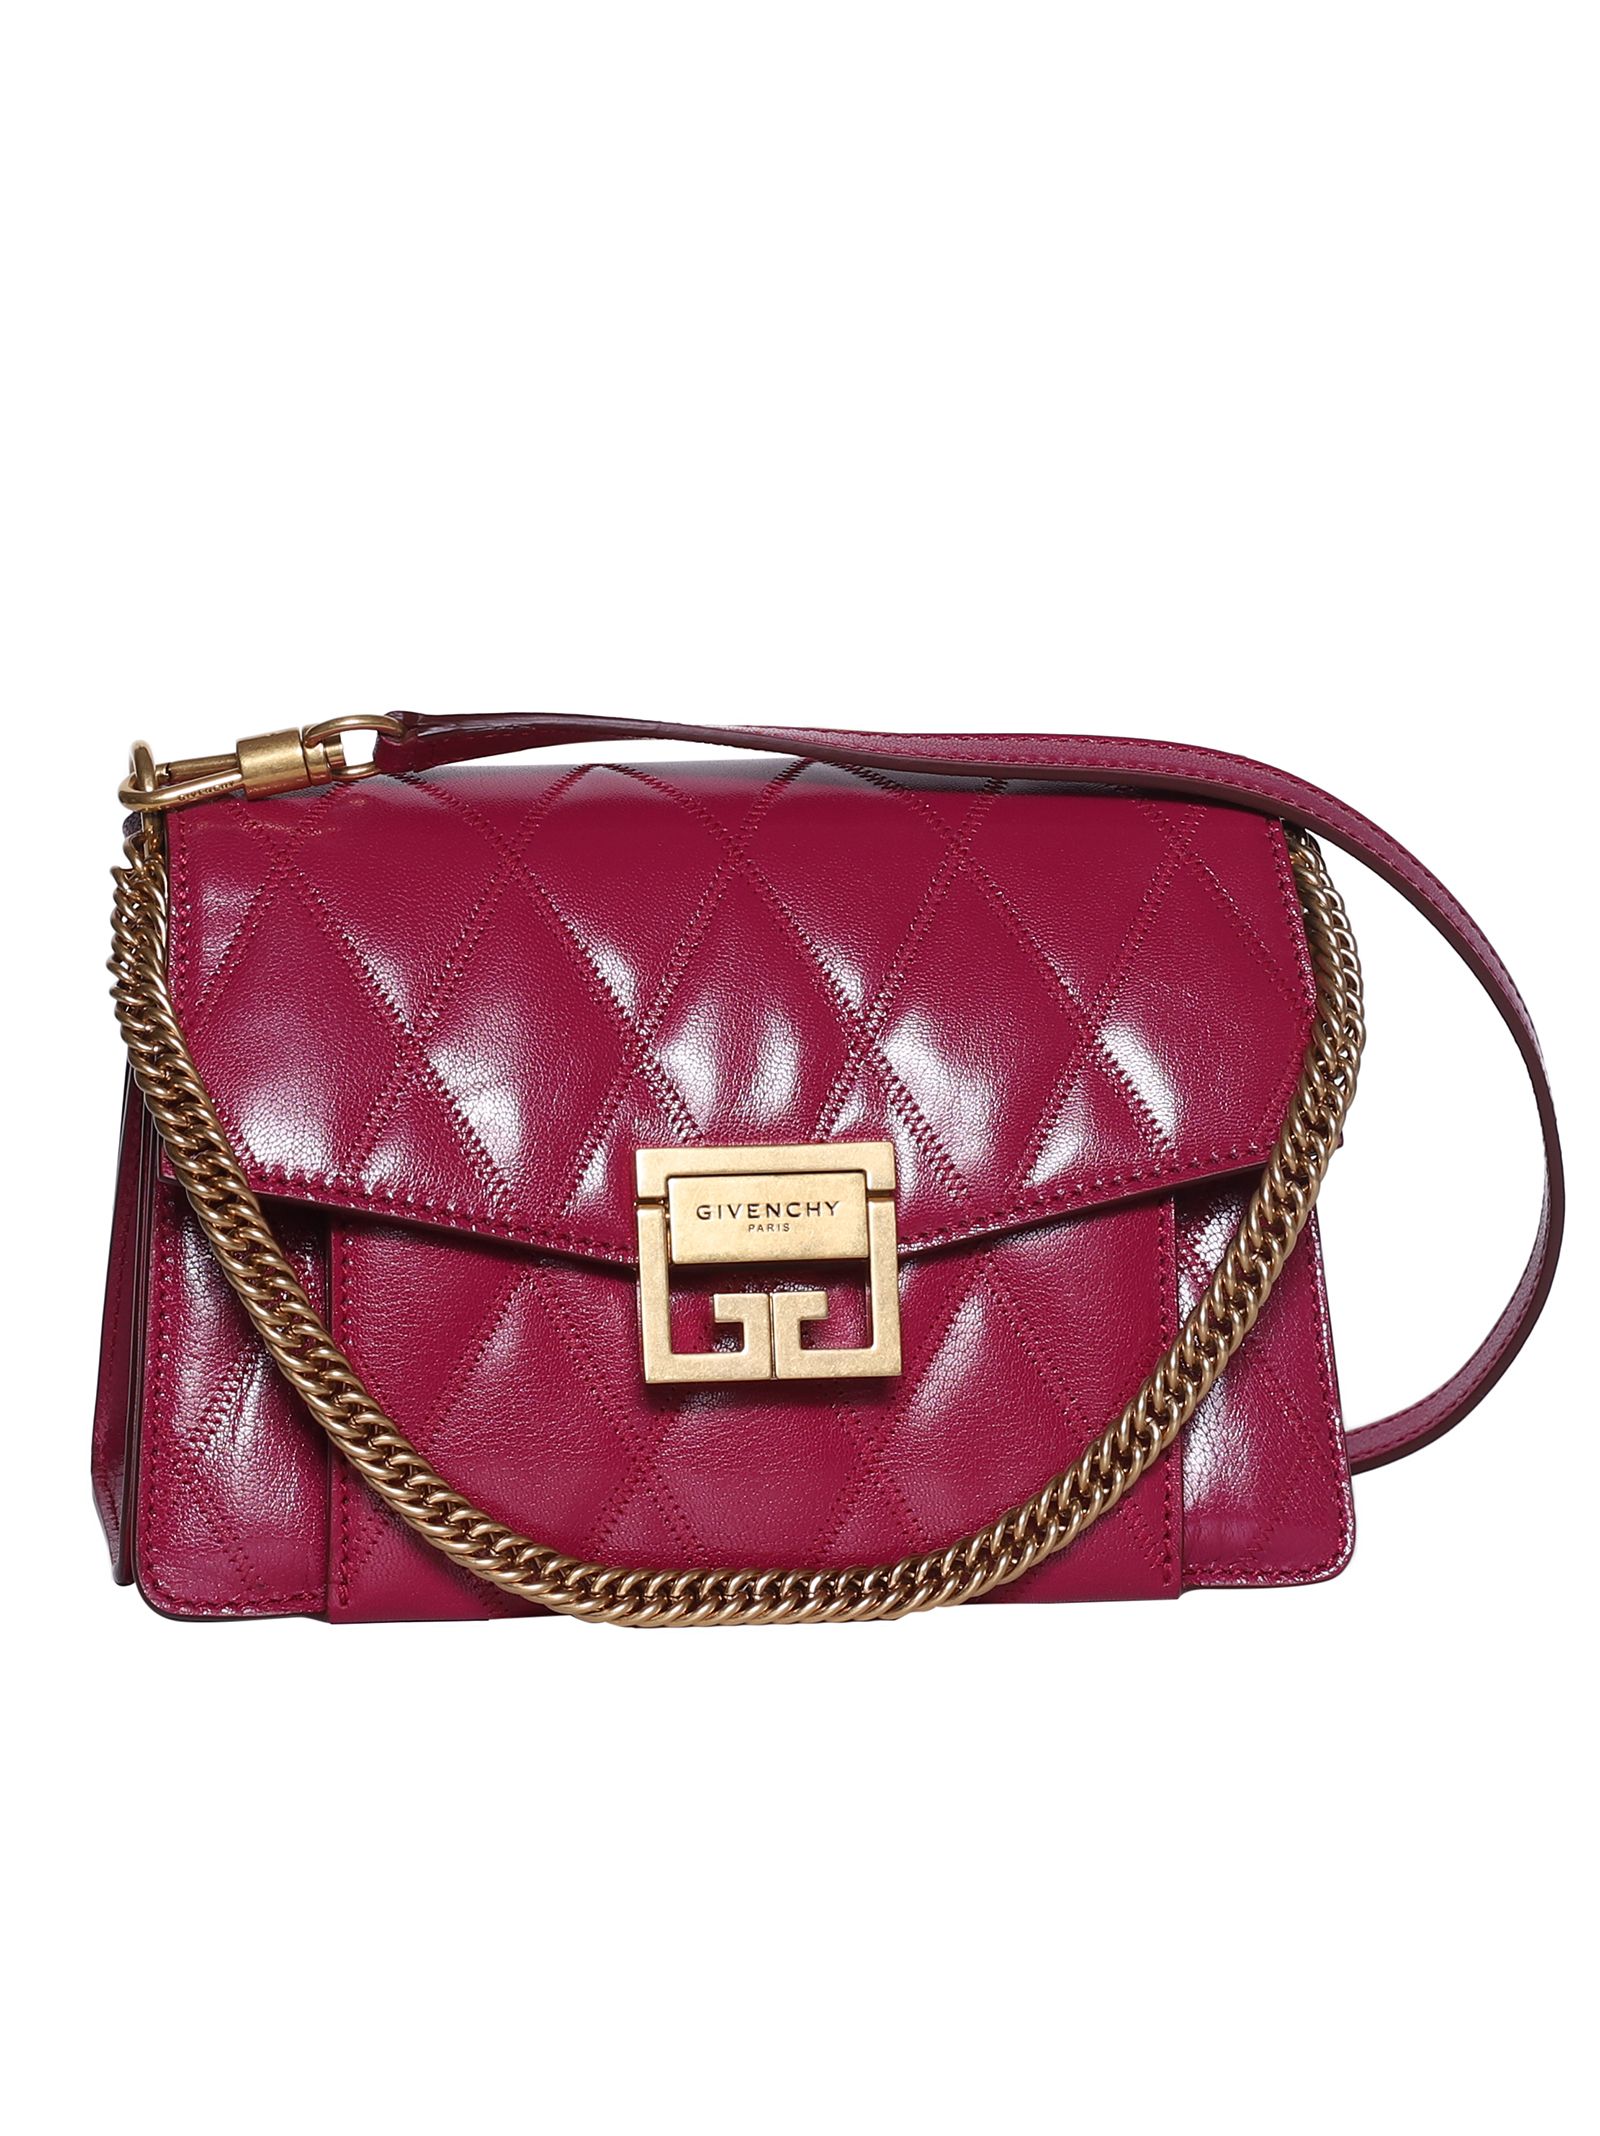 Givenchy Givenchy Logo Shoulder Bag - Orchid purple - 10925416 | italist